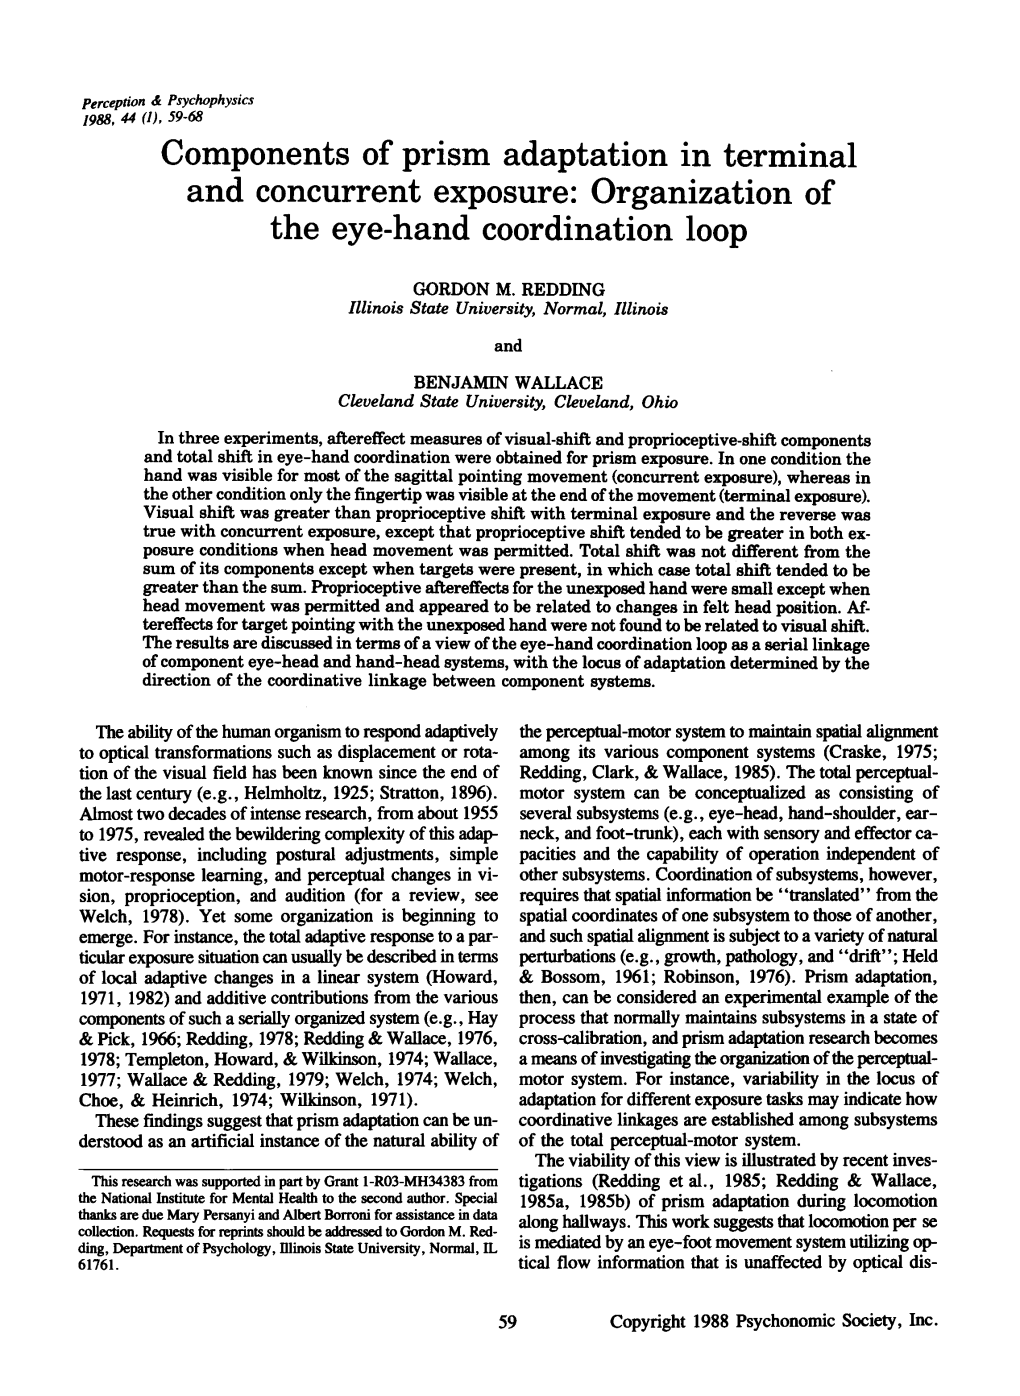 Components of Prism Adaptation in Terminal and Concurrent Exposure: Organization of the Eye-Hand Coordination Loop